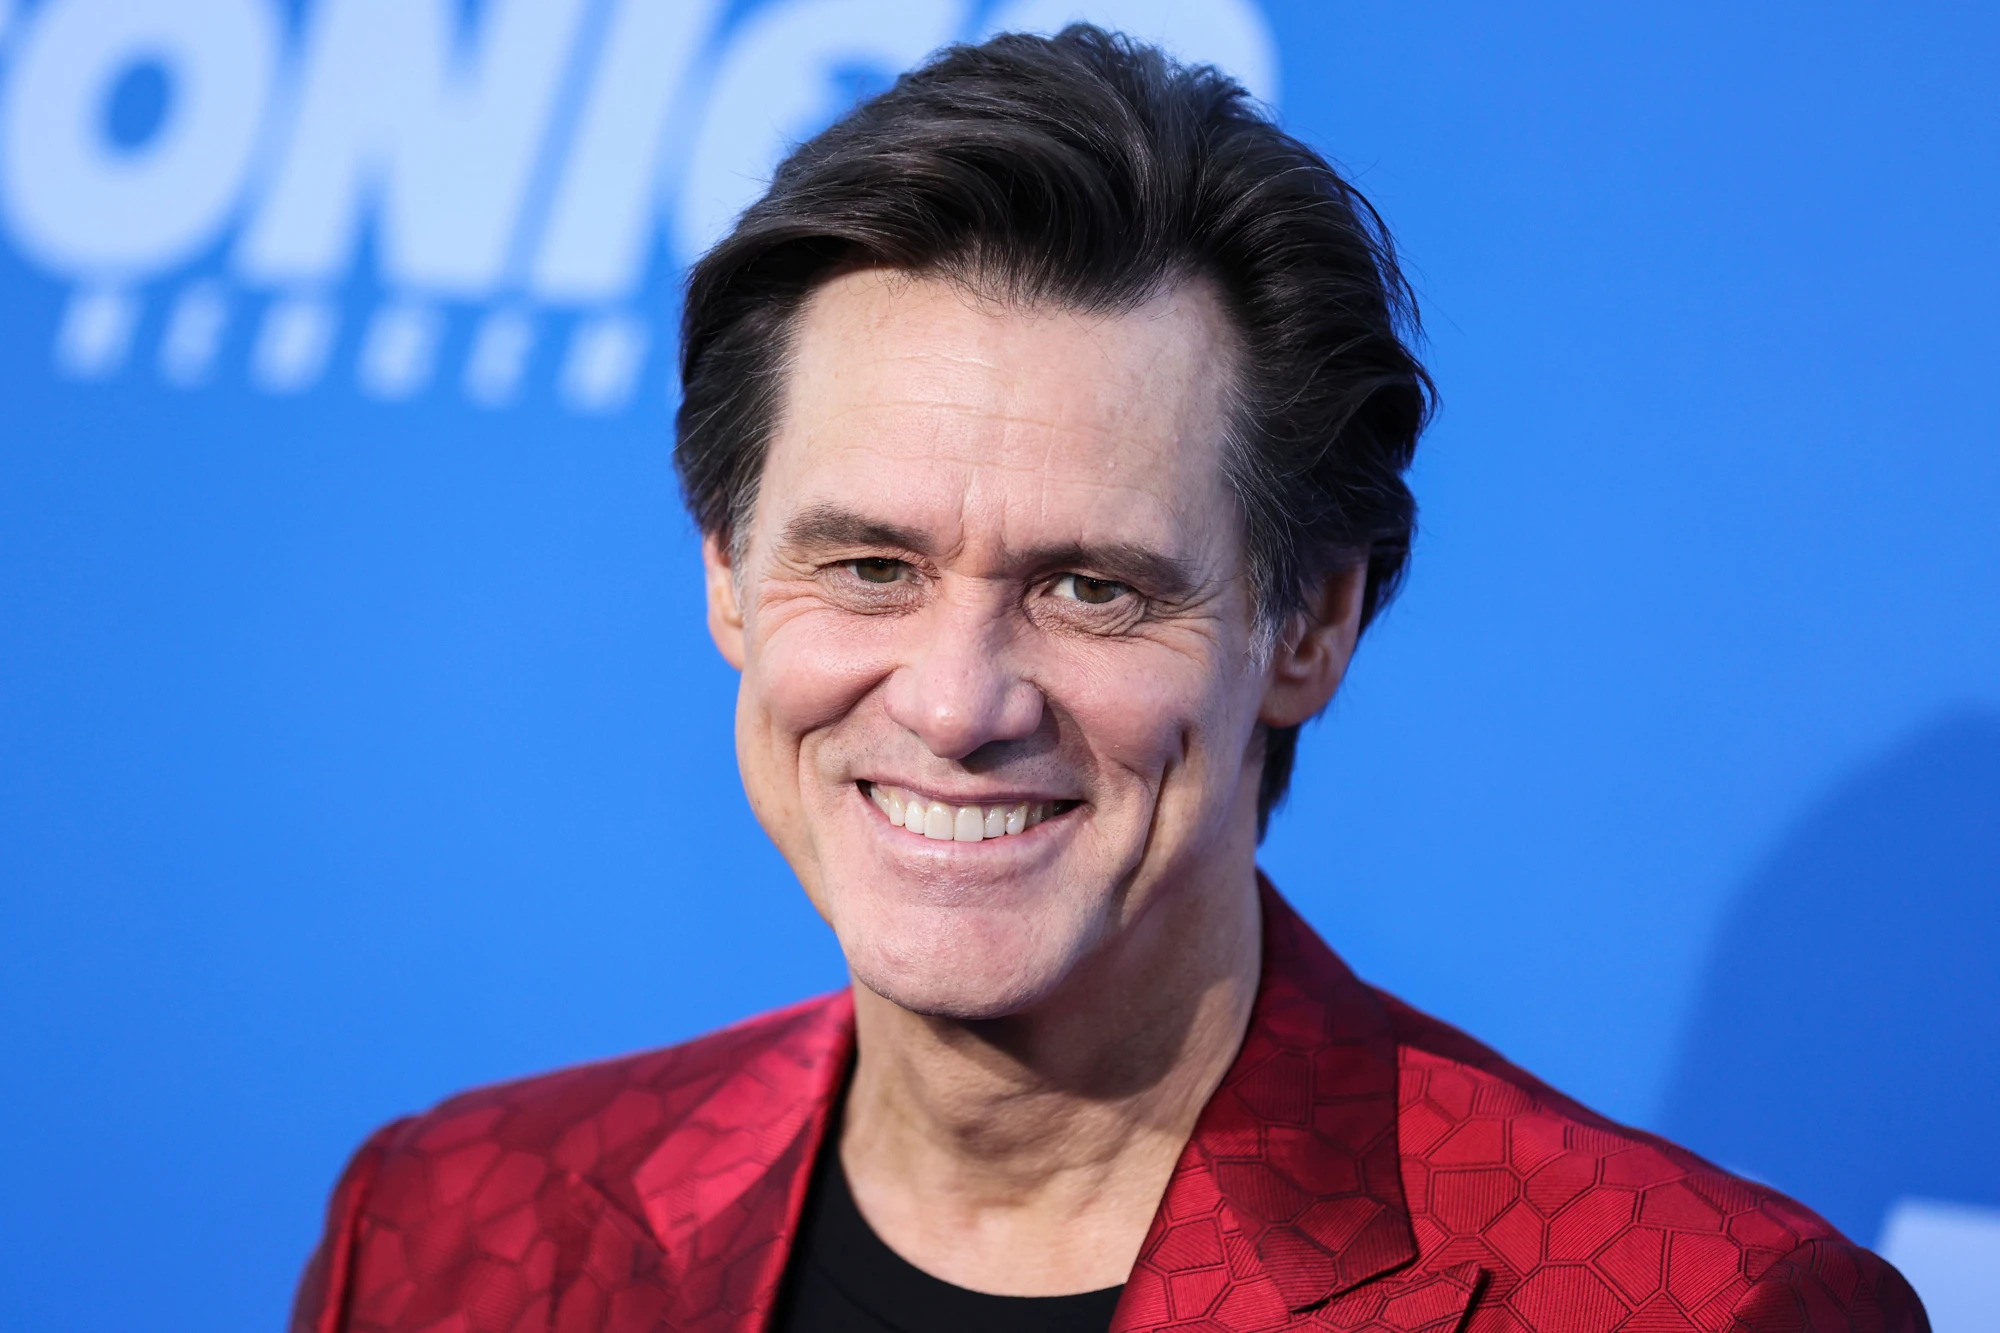 Jim Carrey wearing a red suit at one of his movie's premier